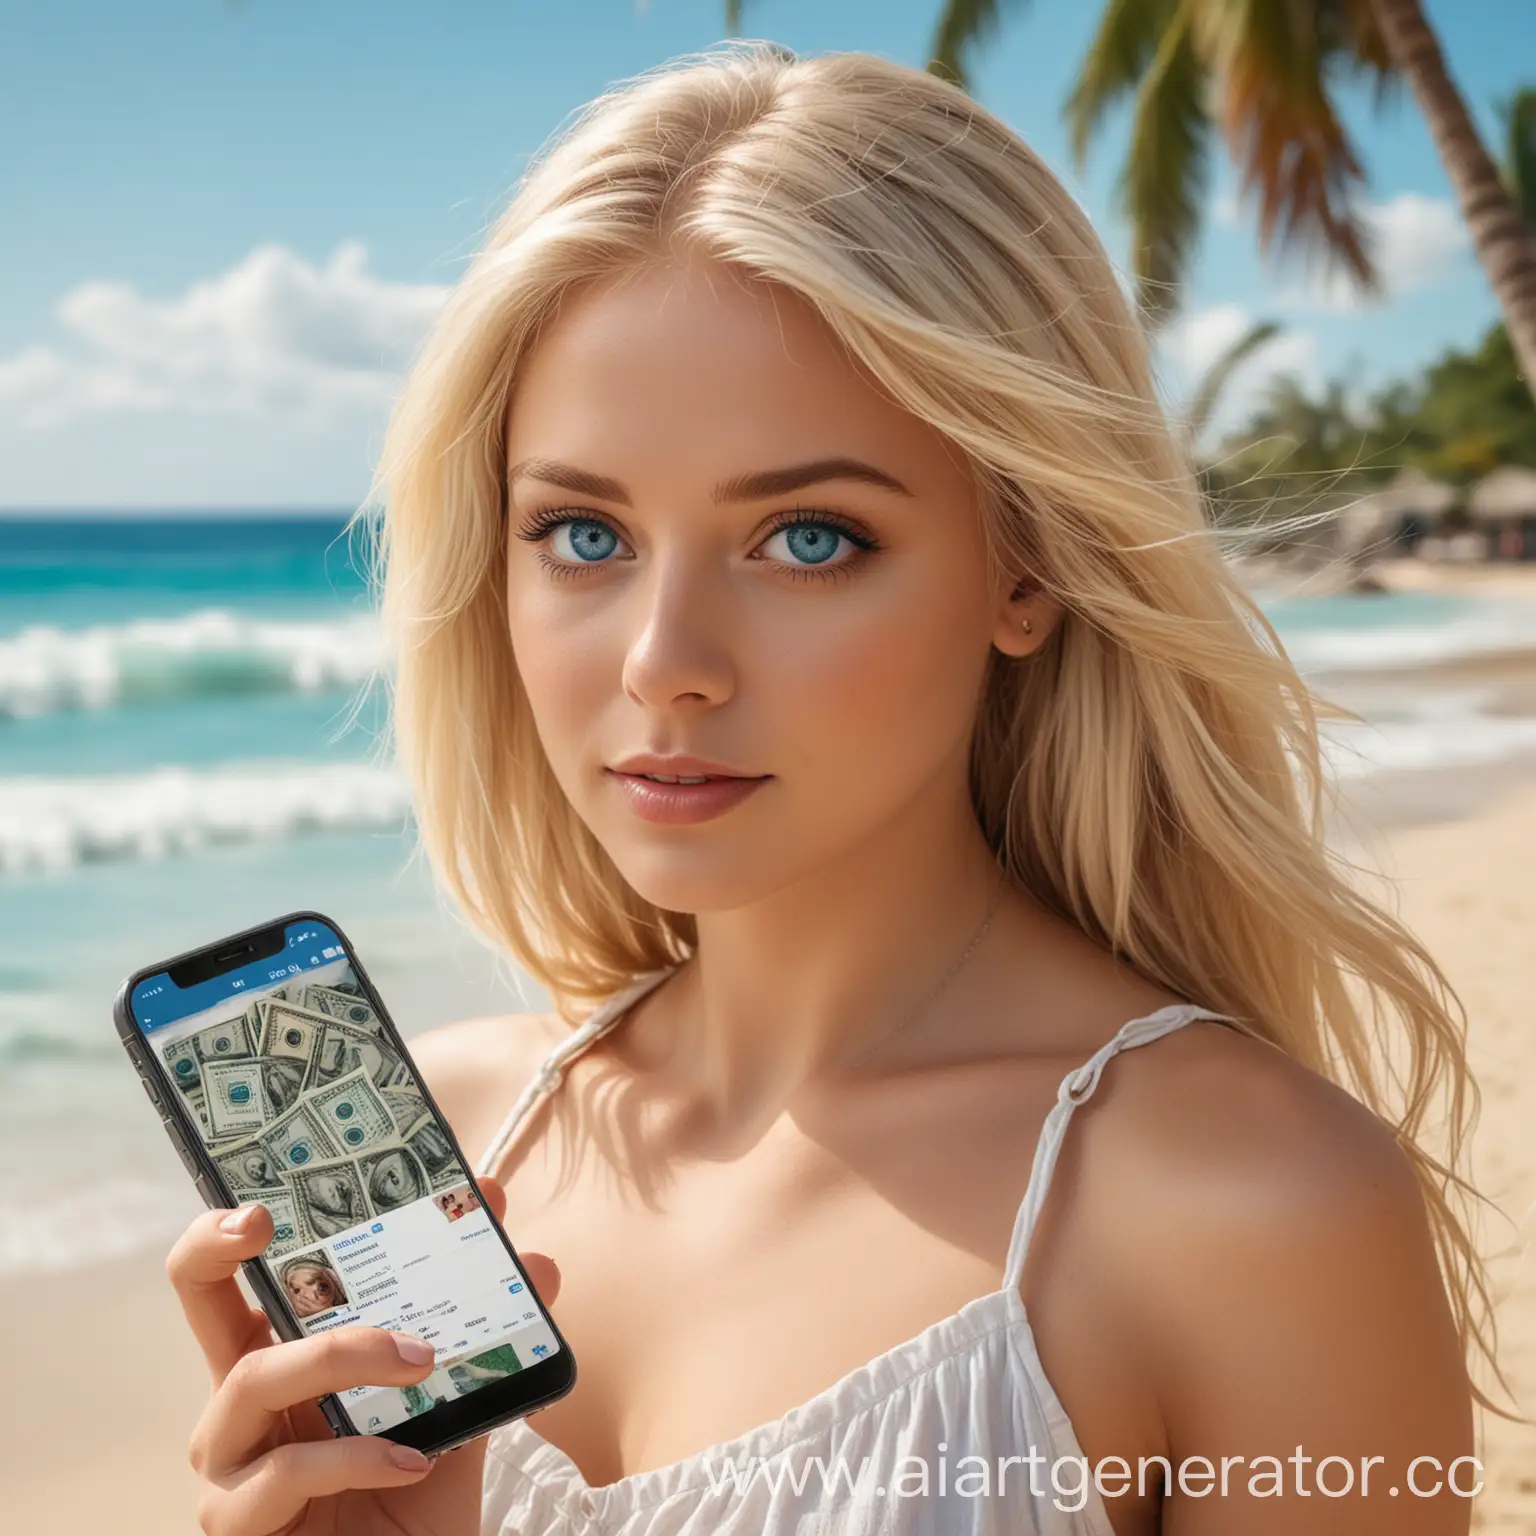 Beautiful-Blonde-Woman-with-Phone-on-Tropical-Beach-Telegram-Logo-and-Money-Concept